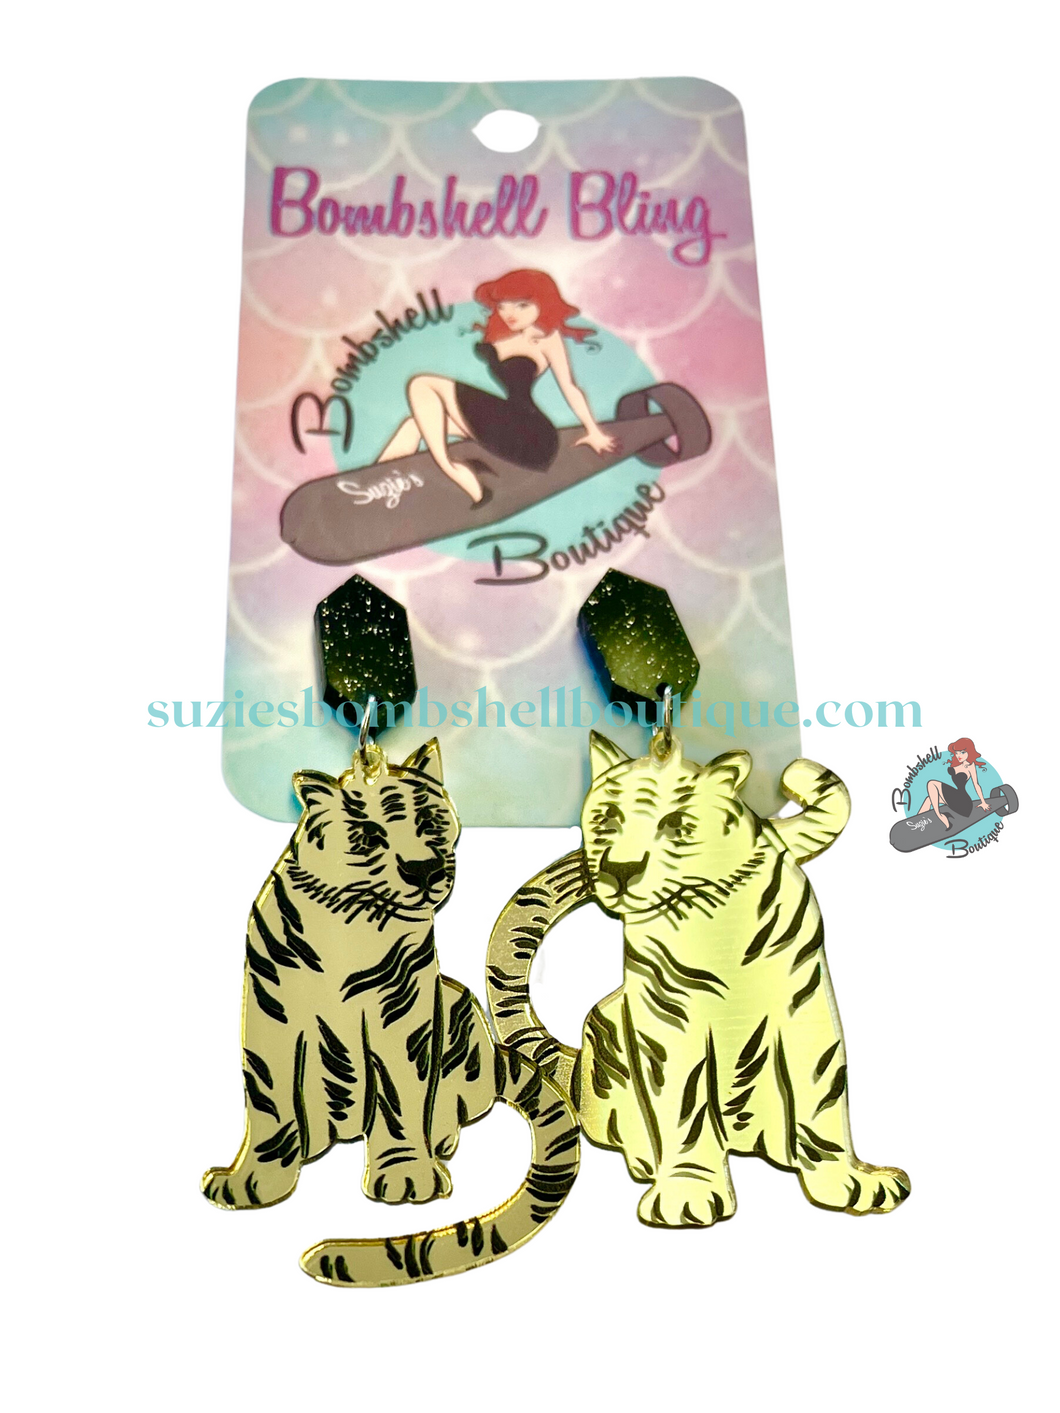 Bombshell Bling Metallic Tiger Earrings gold and black acrylic earrings in shape of tiger shiny metallic finish novelty altfashion pinup resin costume jewellery Canadian Pin-Up Shop Suzie's Bombshell Boutique